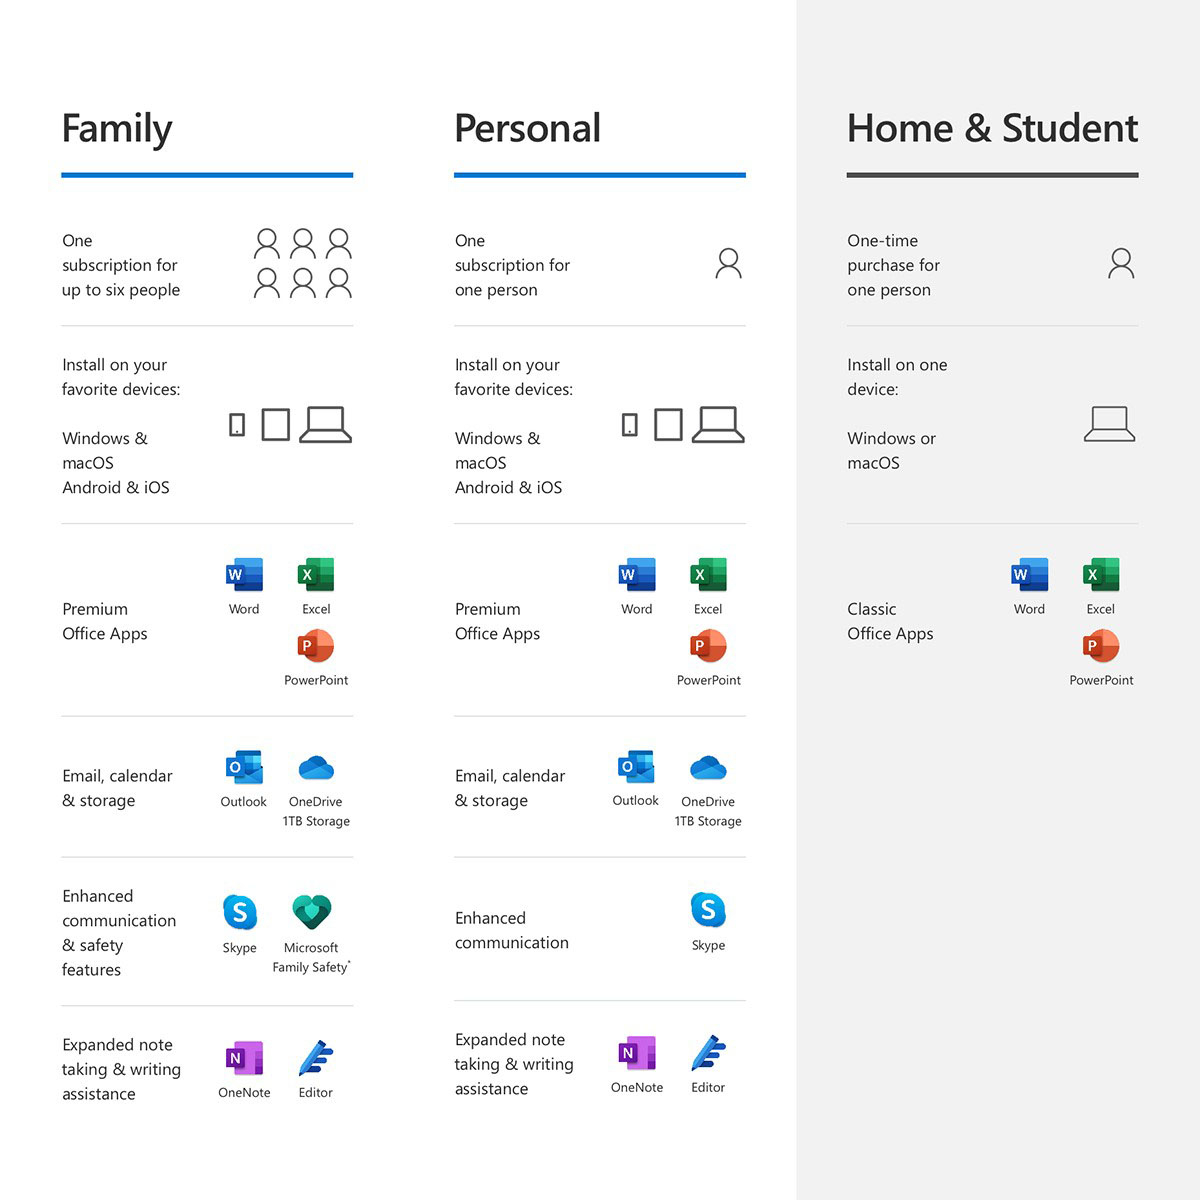 Microsoft 365 Family (formerly Office 365 Home)